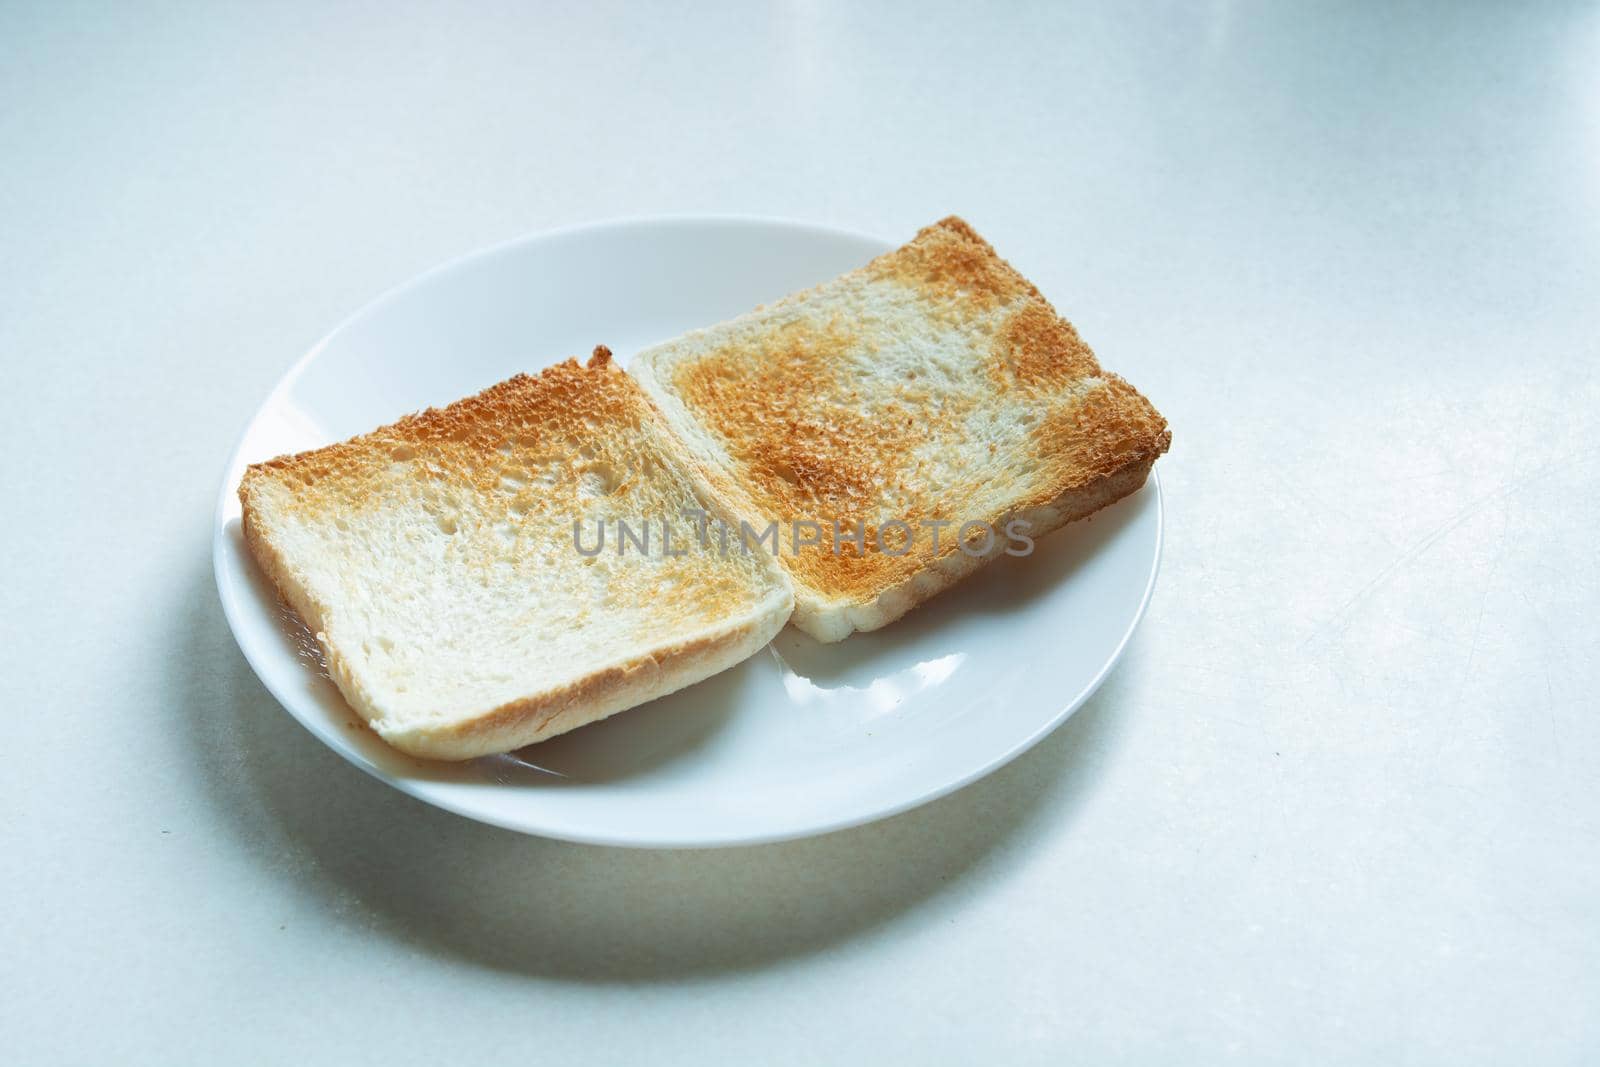 Two baked toasts lying on a plate by darekb22